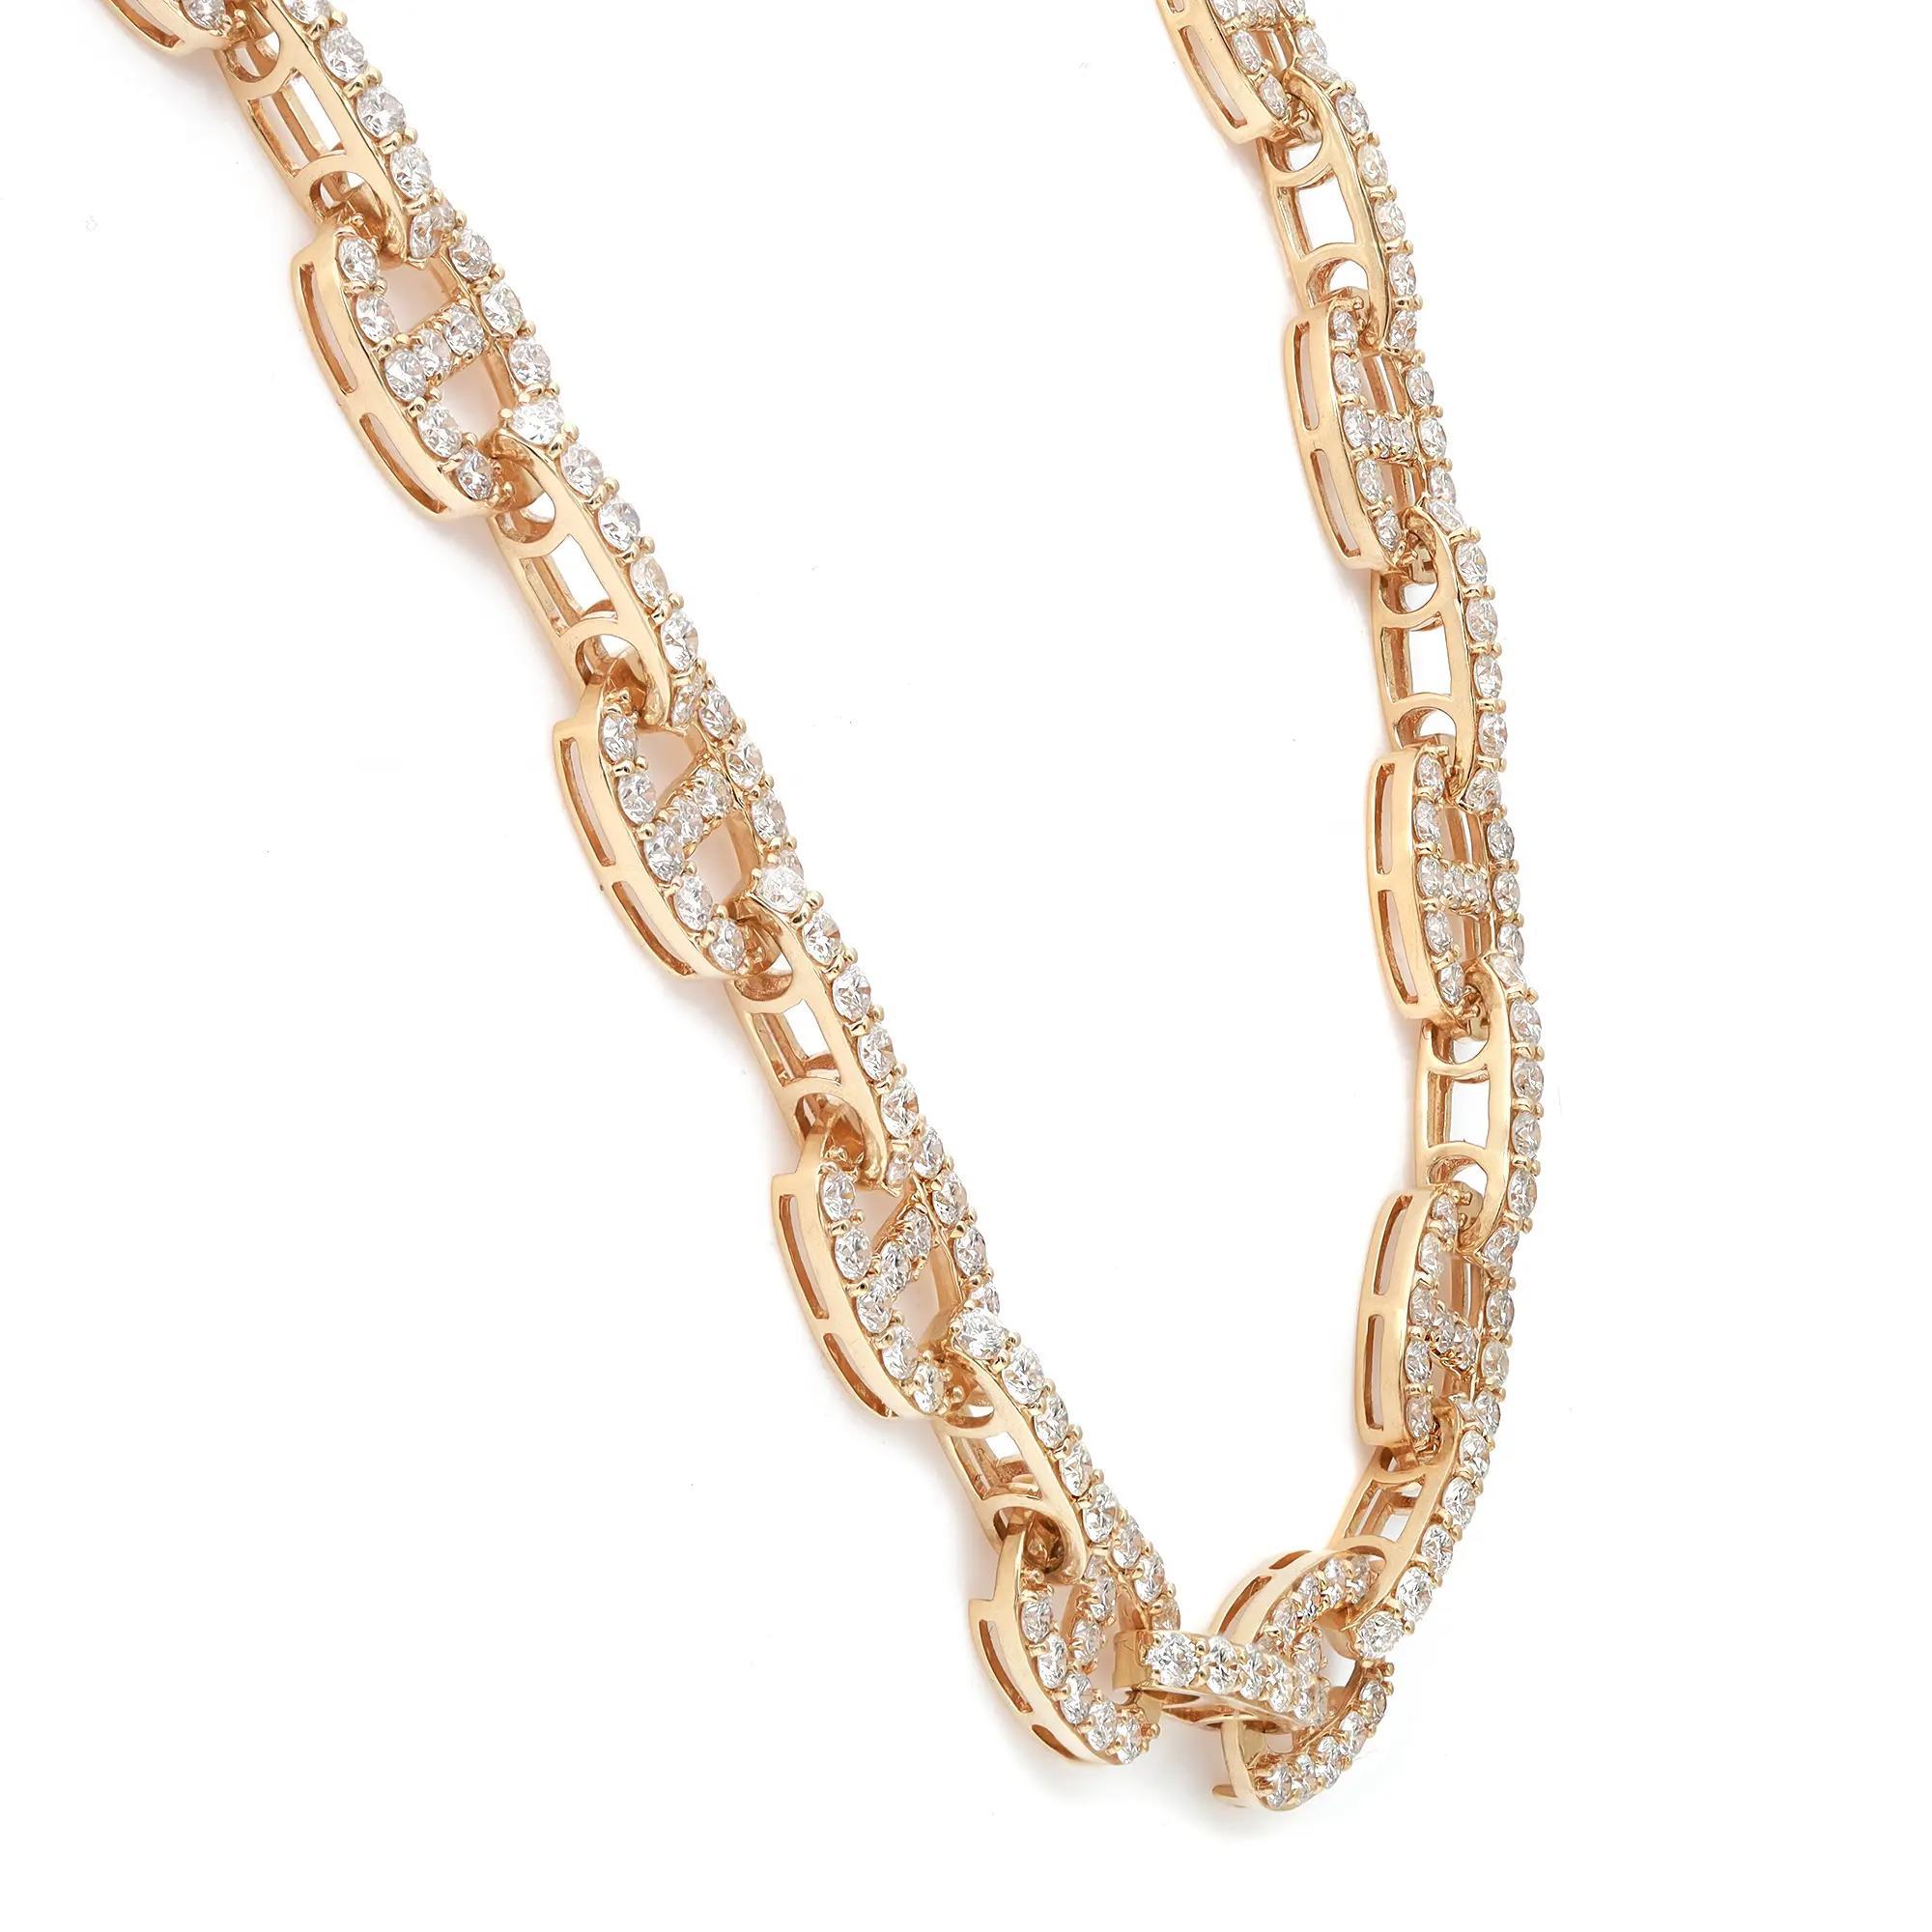 Elevate your jewelry collection with the 14.95 Carat Diamond Mariner Link Chain Necklace in 18K Yellow Gold. This exquisite piece is a symphony of opulence and craftsmanship, featuring a meticulously designed mariner link chain in radiant 18K yellow